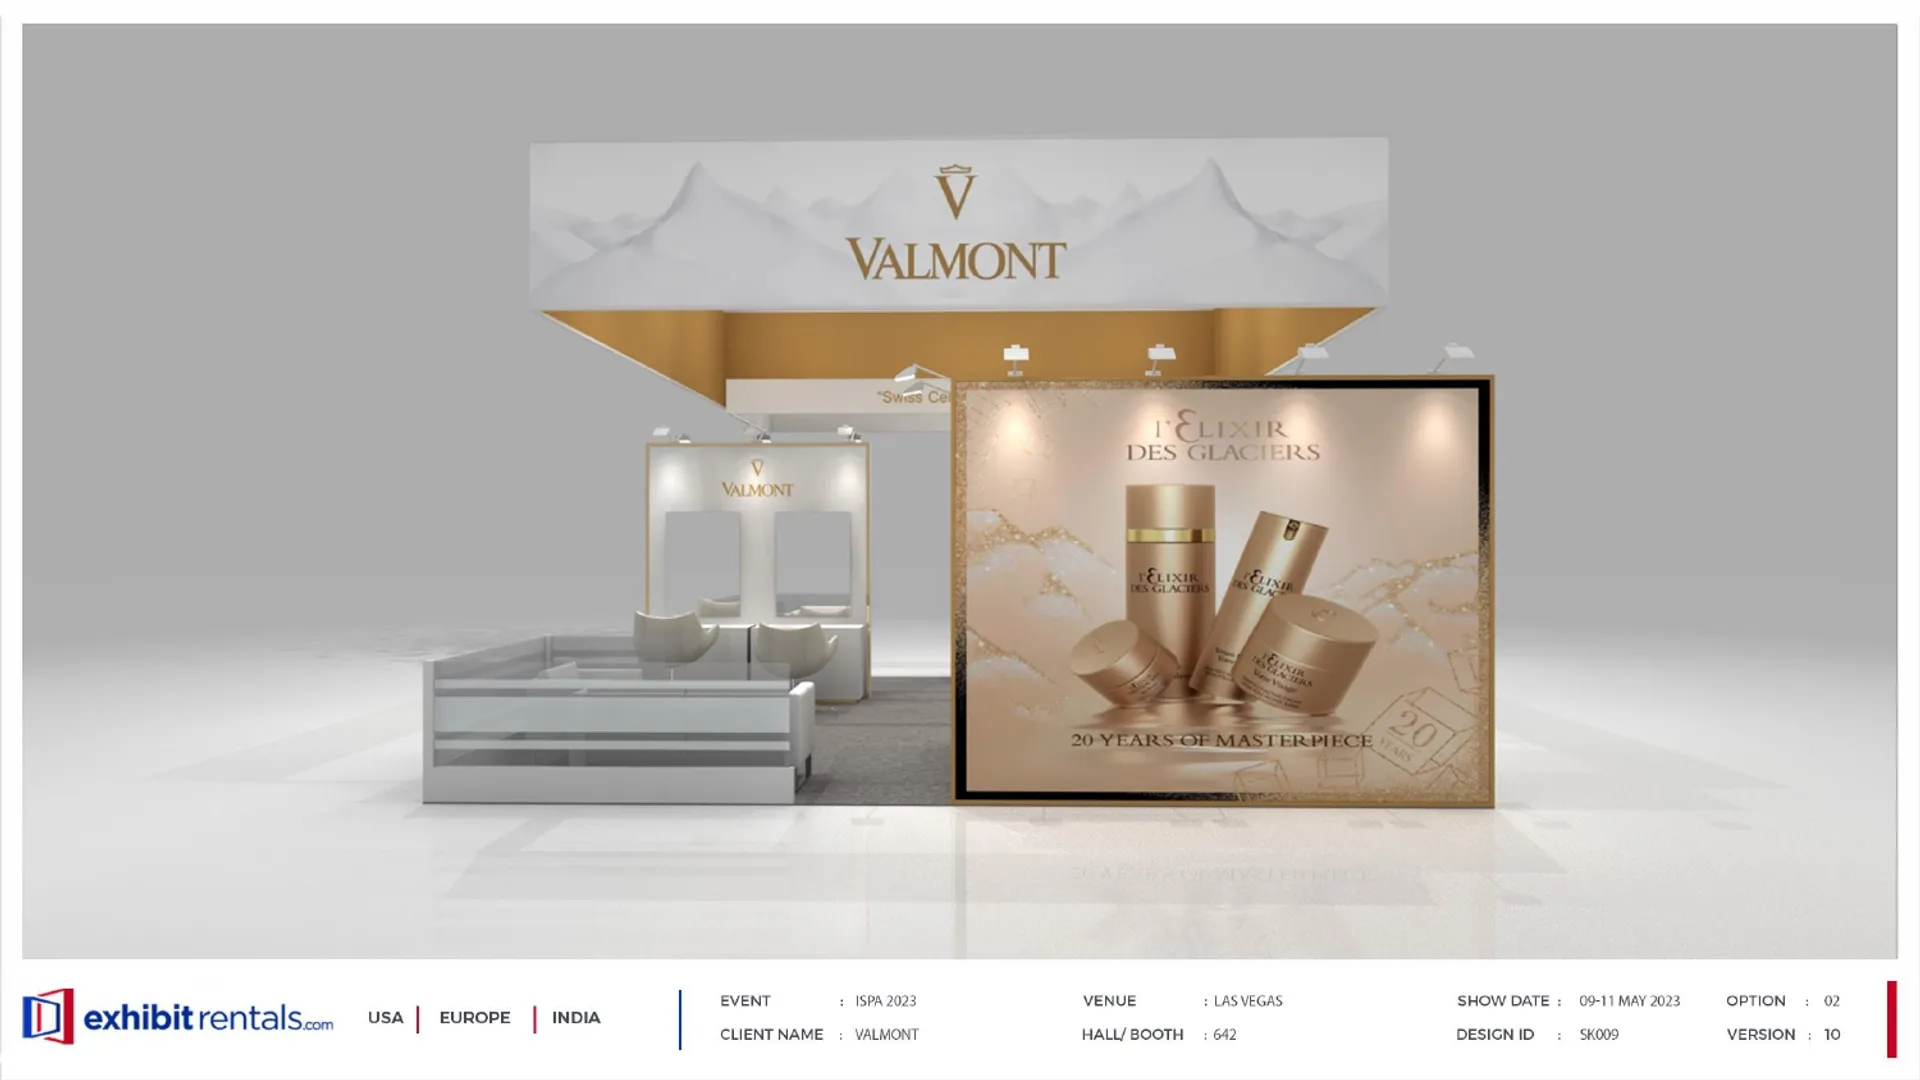 booth-design-projects/Exhibit-Rentals/2024-04-17-20x20-ISLAND-Project-109/2.10_Valmont_ISPA 2023_ER design presentation -16_page-0001-c1l4l9.jpg